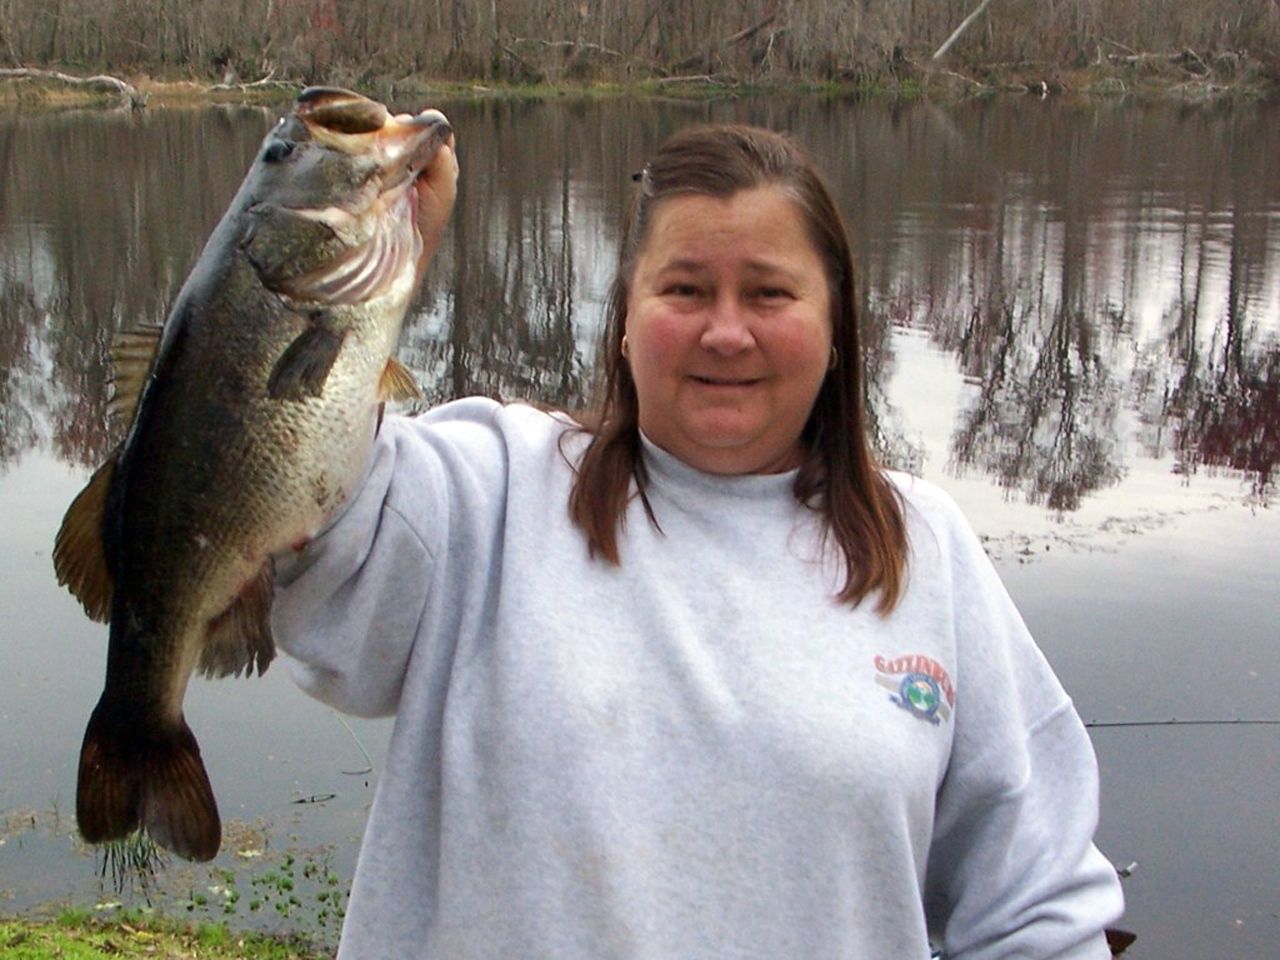 a woman is holding a large fish in her hand